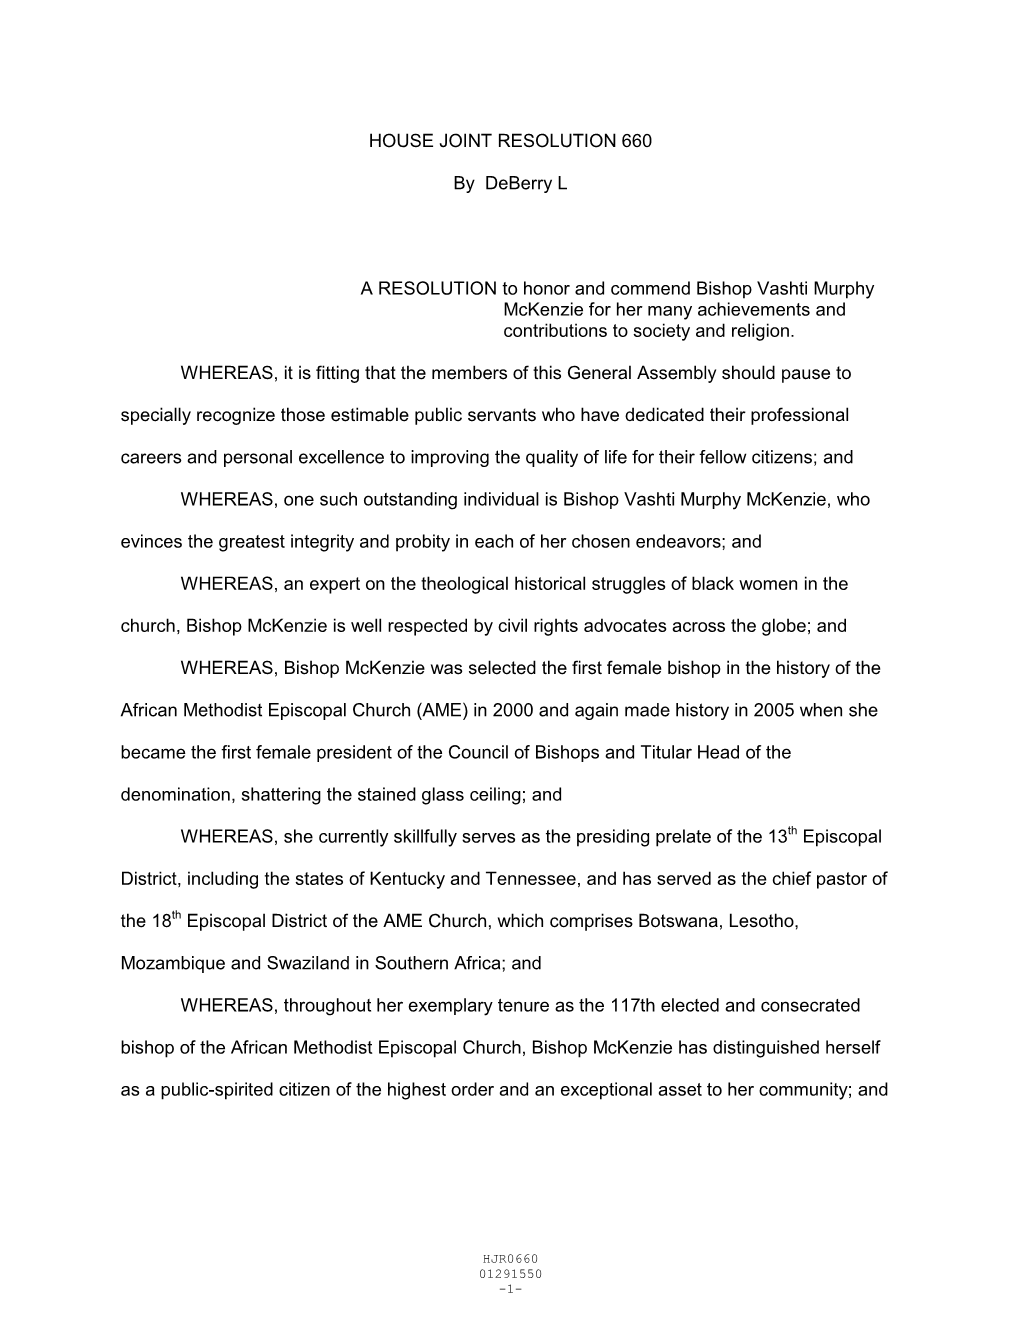 House Joint Resolution 660